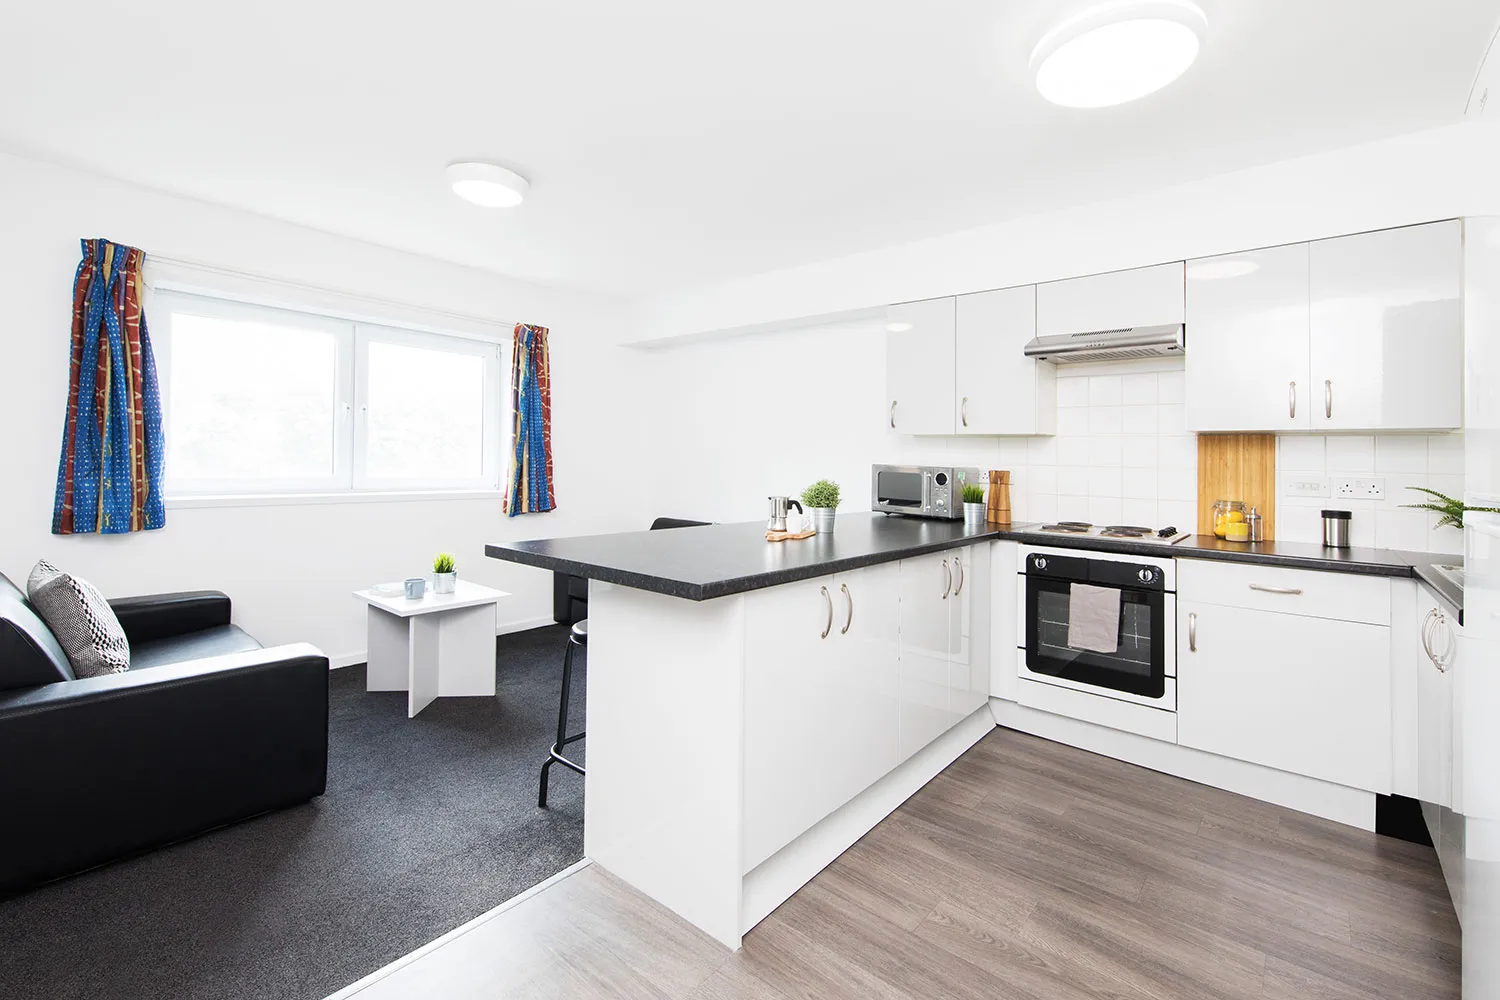 Clodien House Cardiff Student Accommodation,